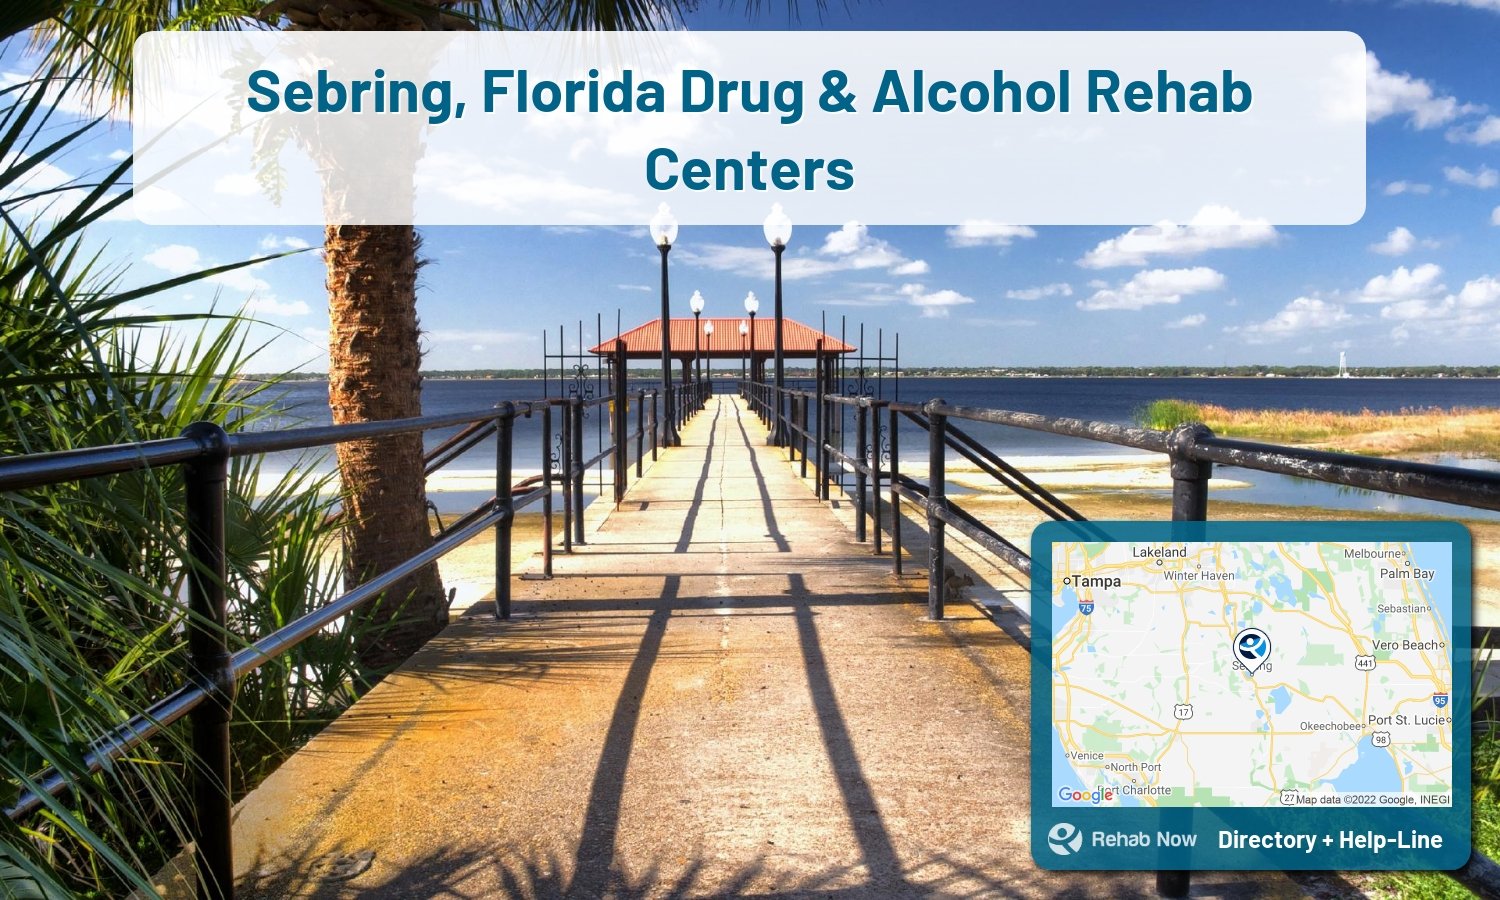 Ready to pick a rehab center in Sebring? Get off alcohol, opiates, and other drugs, by selecting top drug rehab centers in Florida